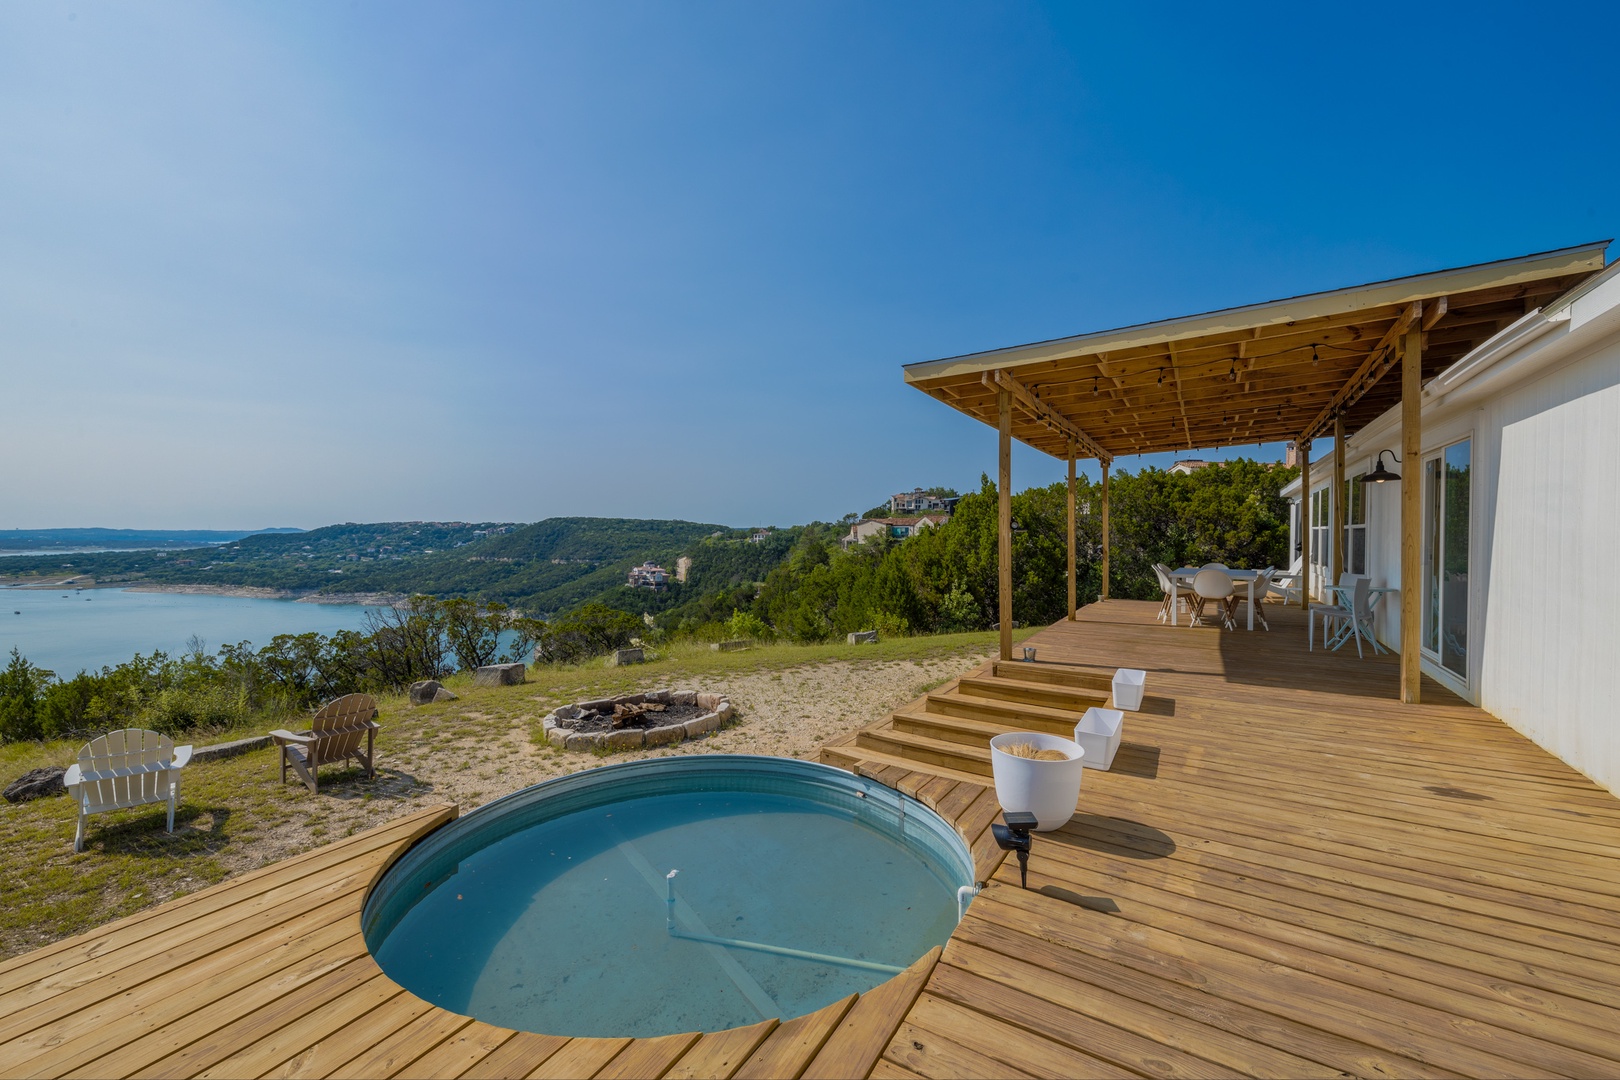 Enjoy a dip in the Texas ranch-style pool at this lakefront property with amazing views